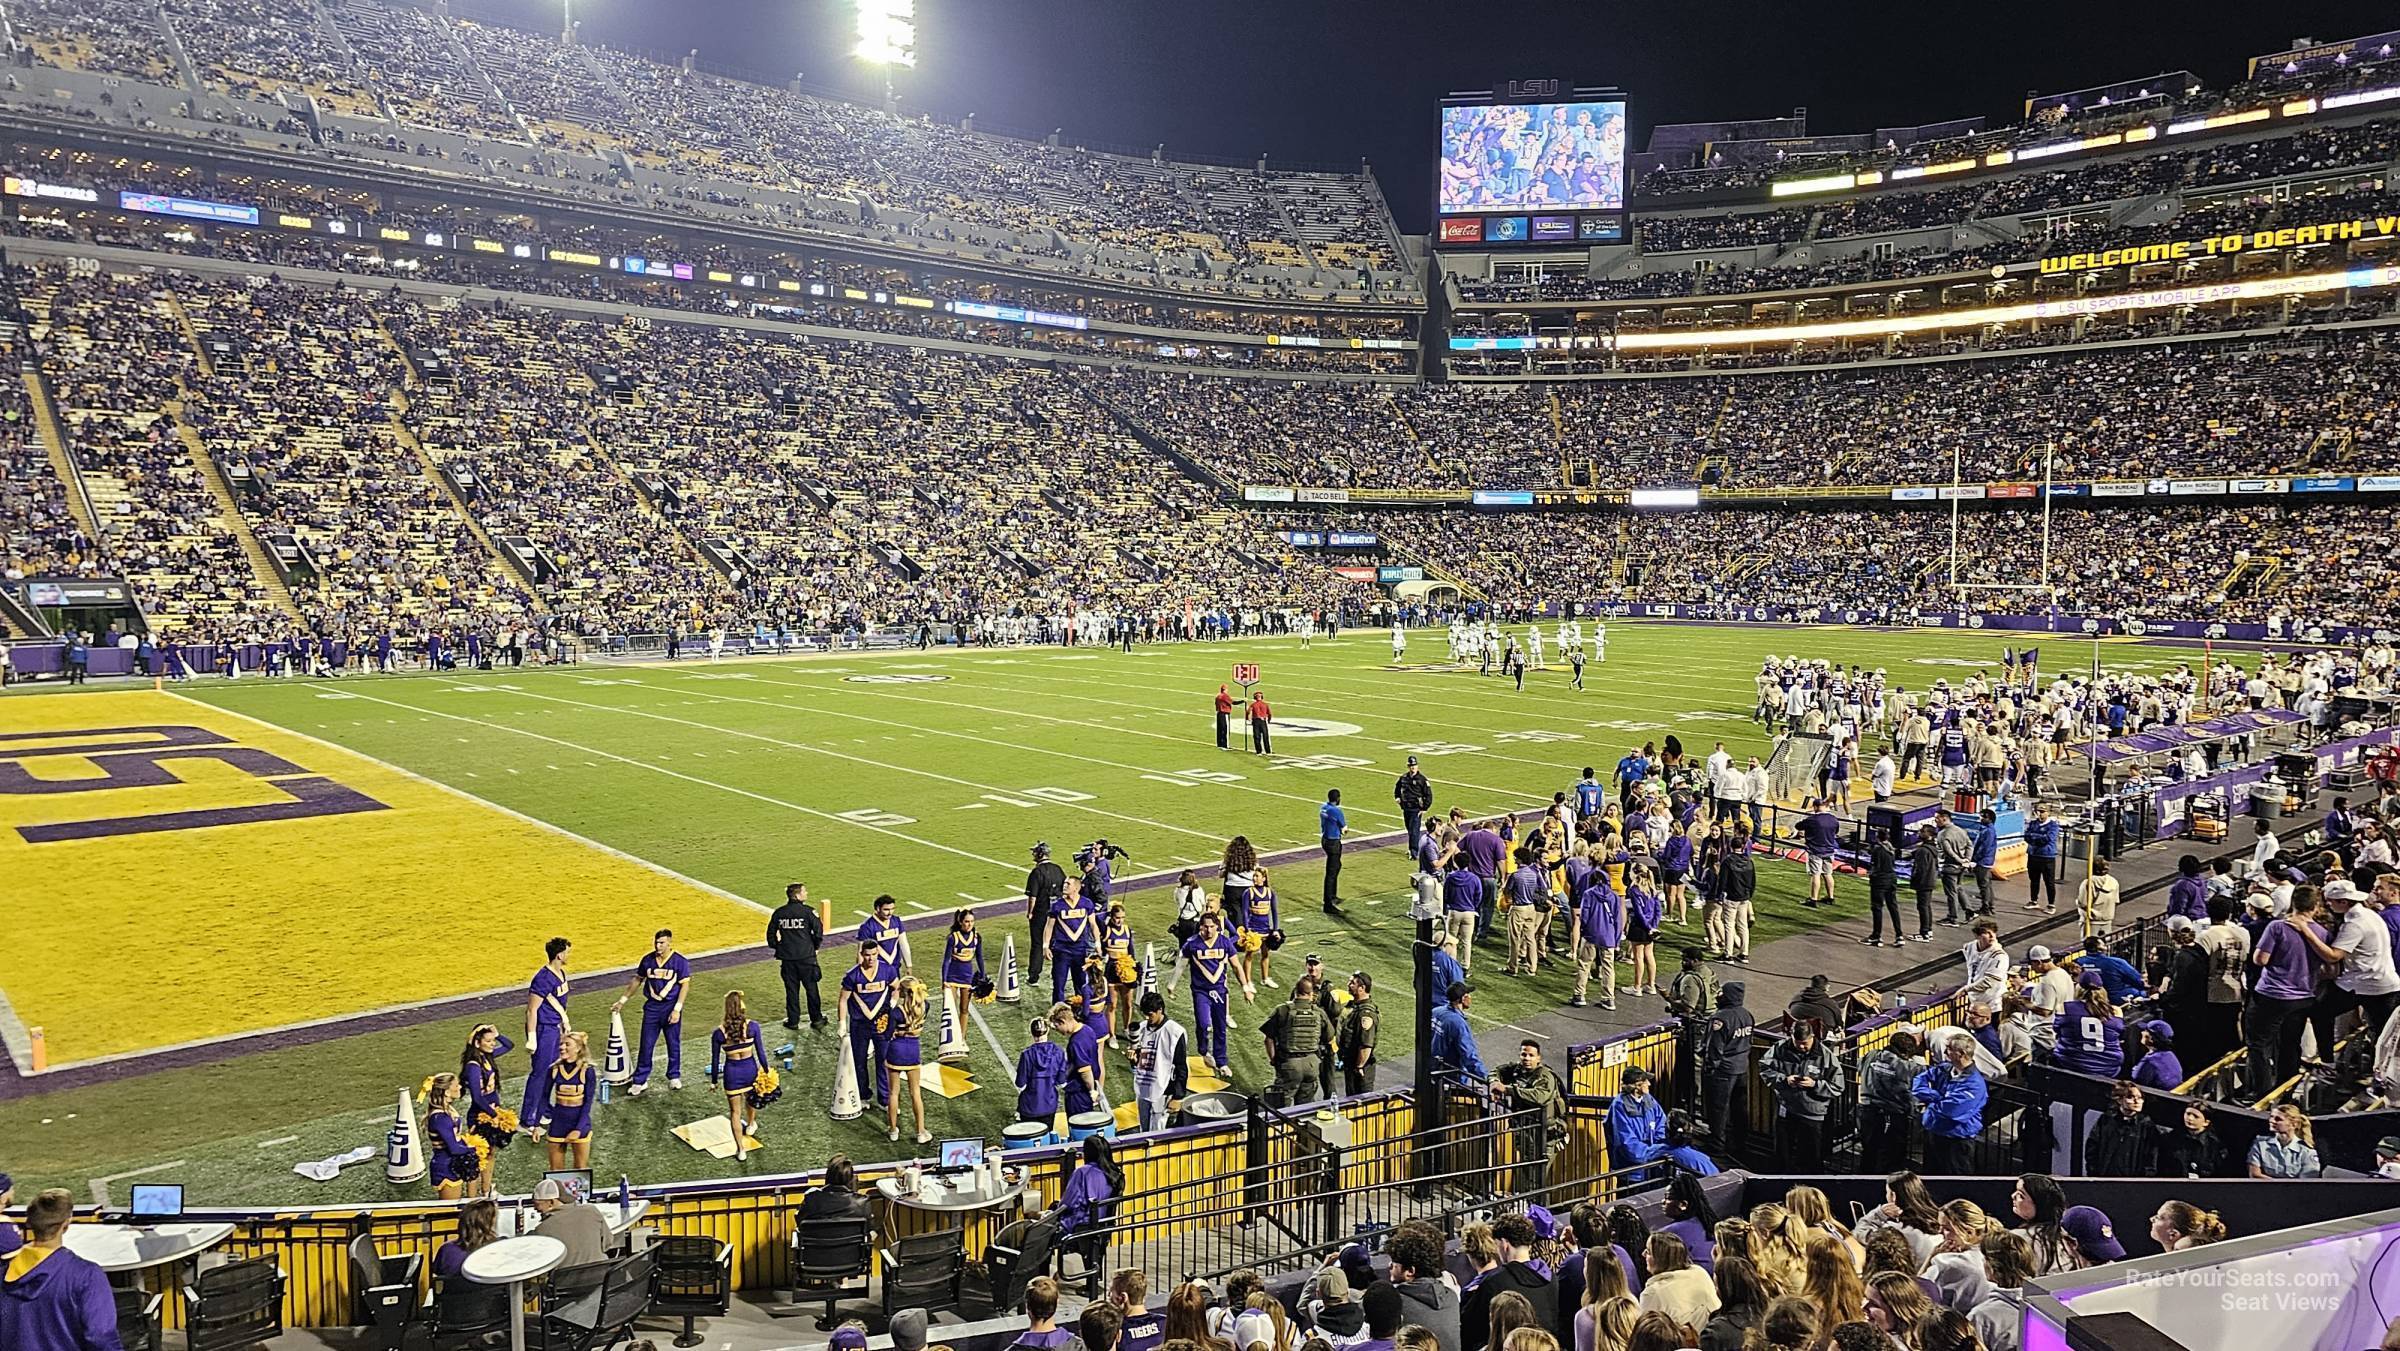 section 201, row 13 seat view  - tiger stadium